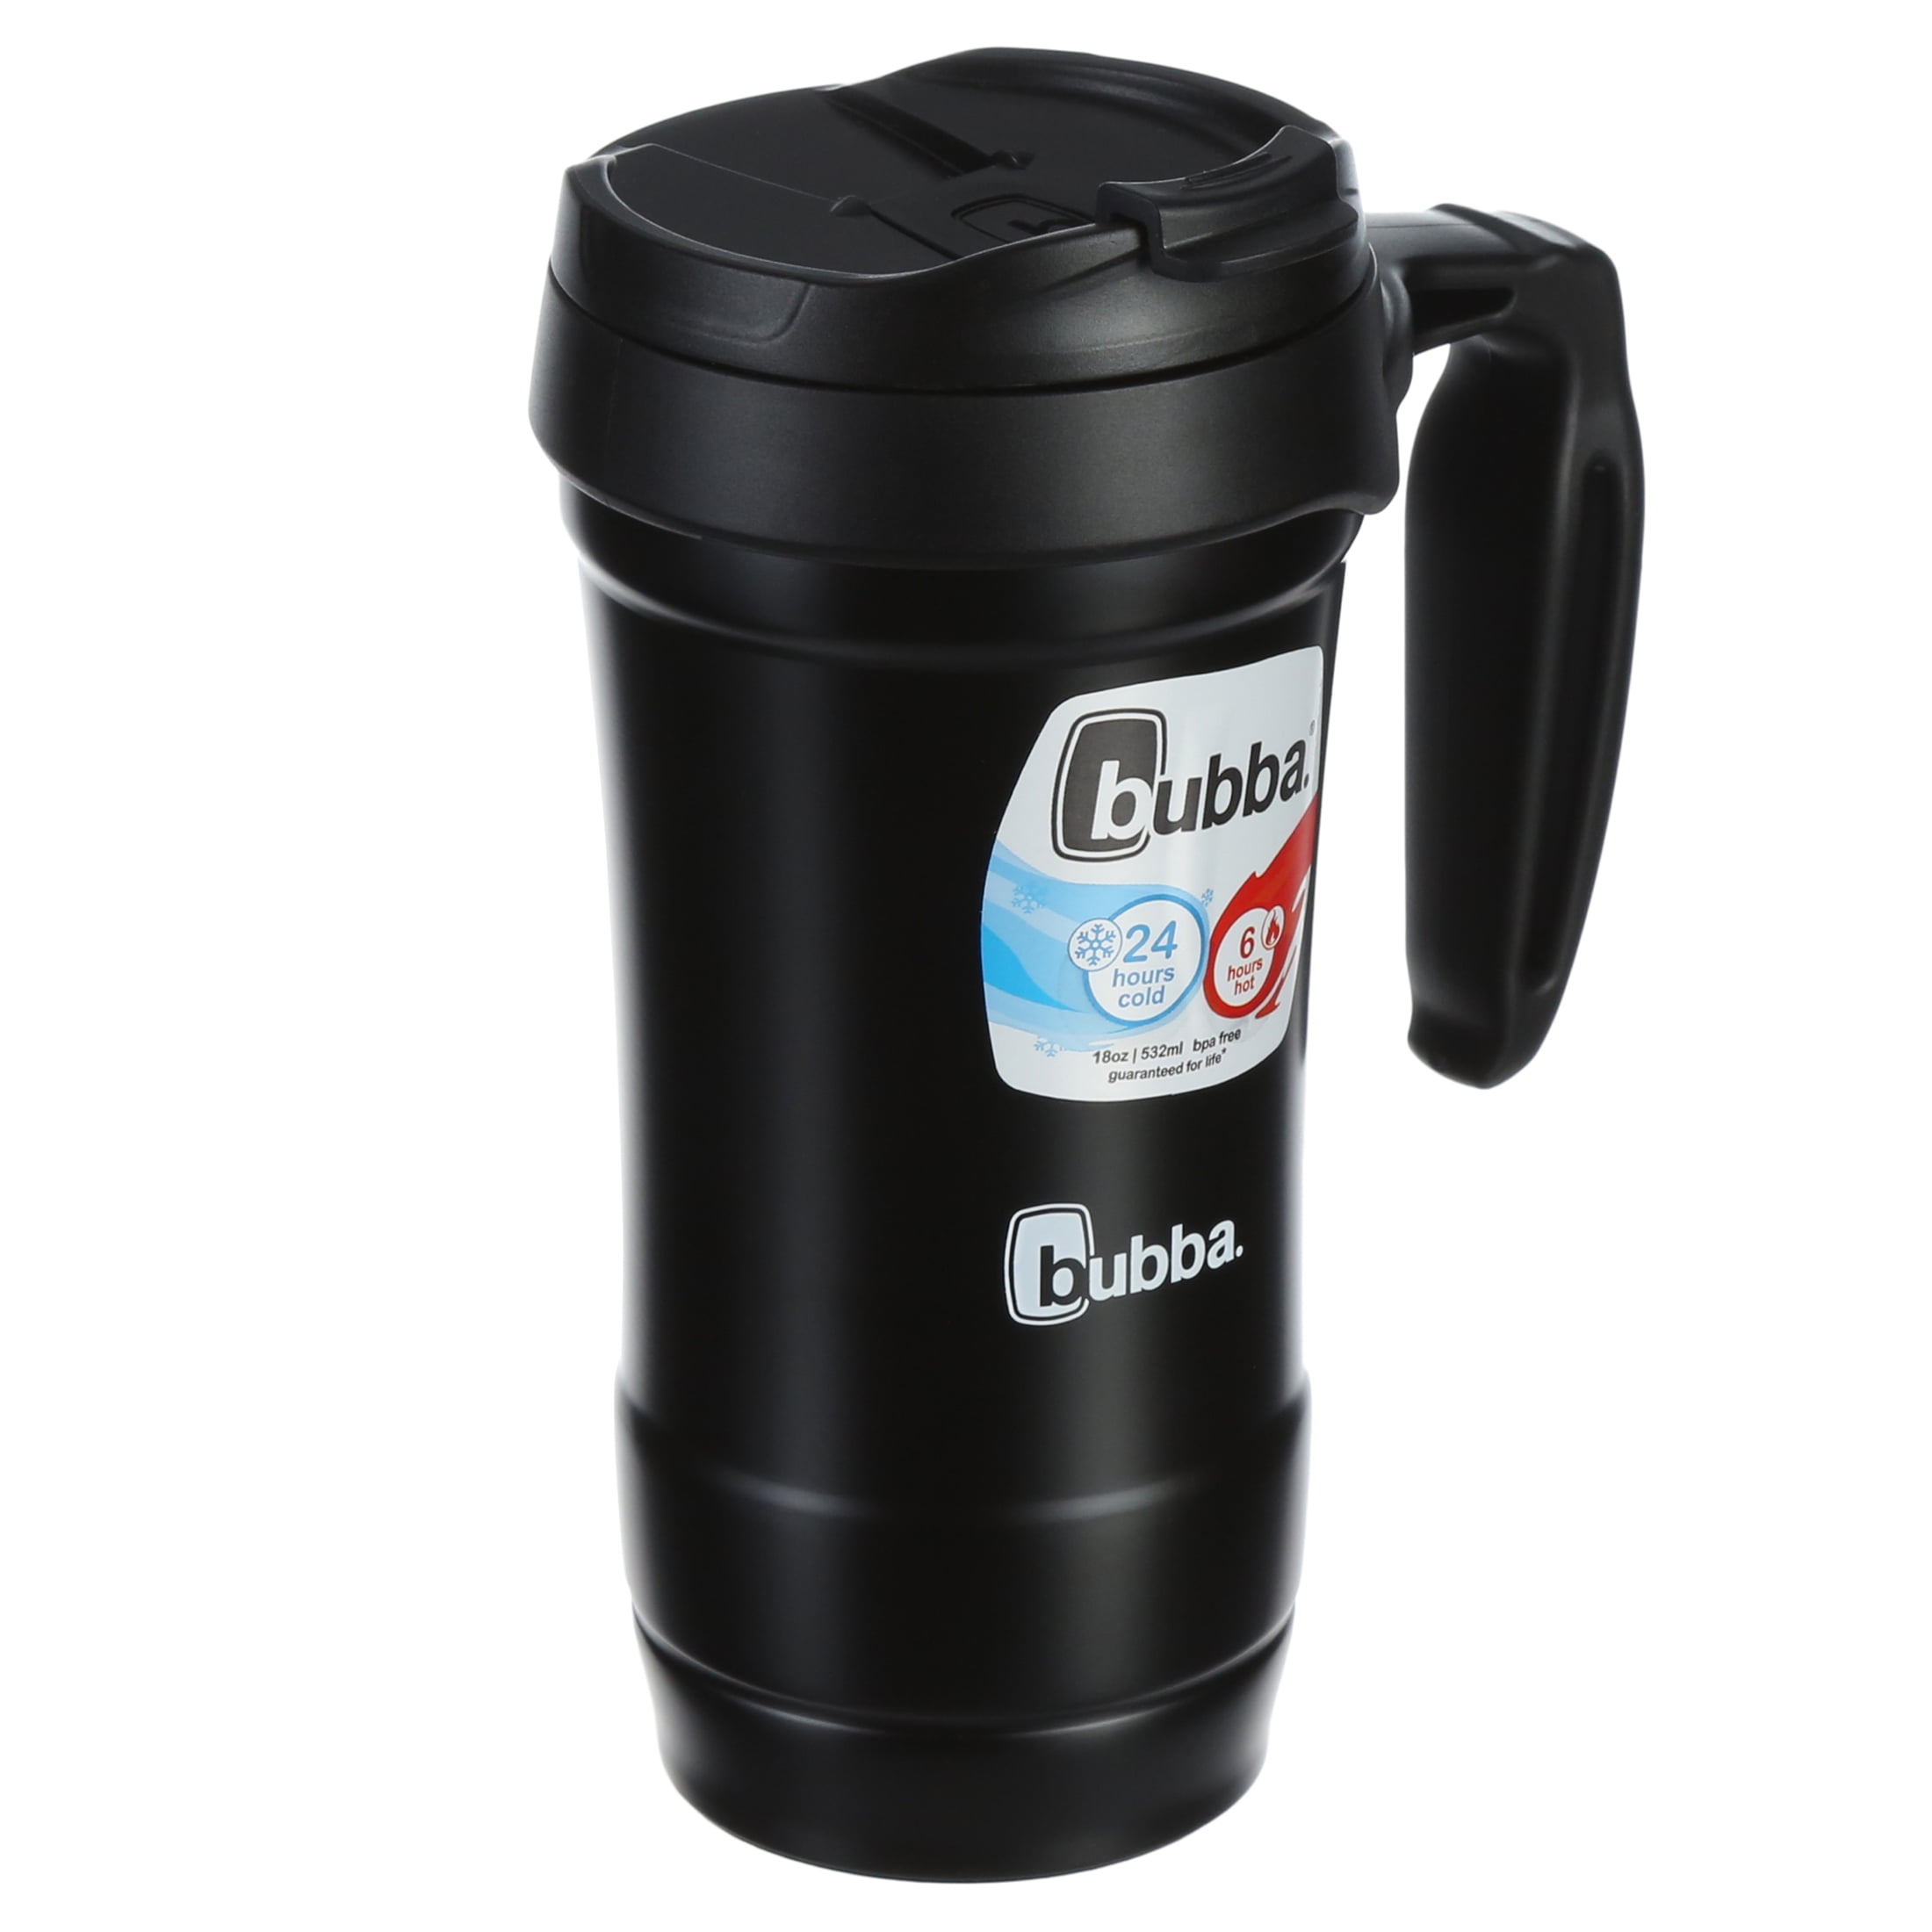 ASOBU 28 oz. Teal Double-Wall Insulated Stainless Steel Travel Mug  NA-SM35TEAL - The Home Depot